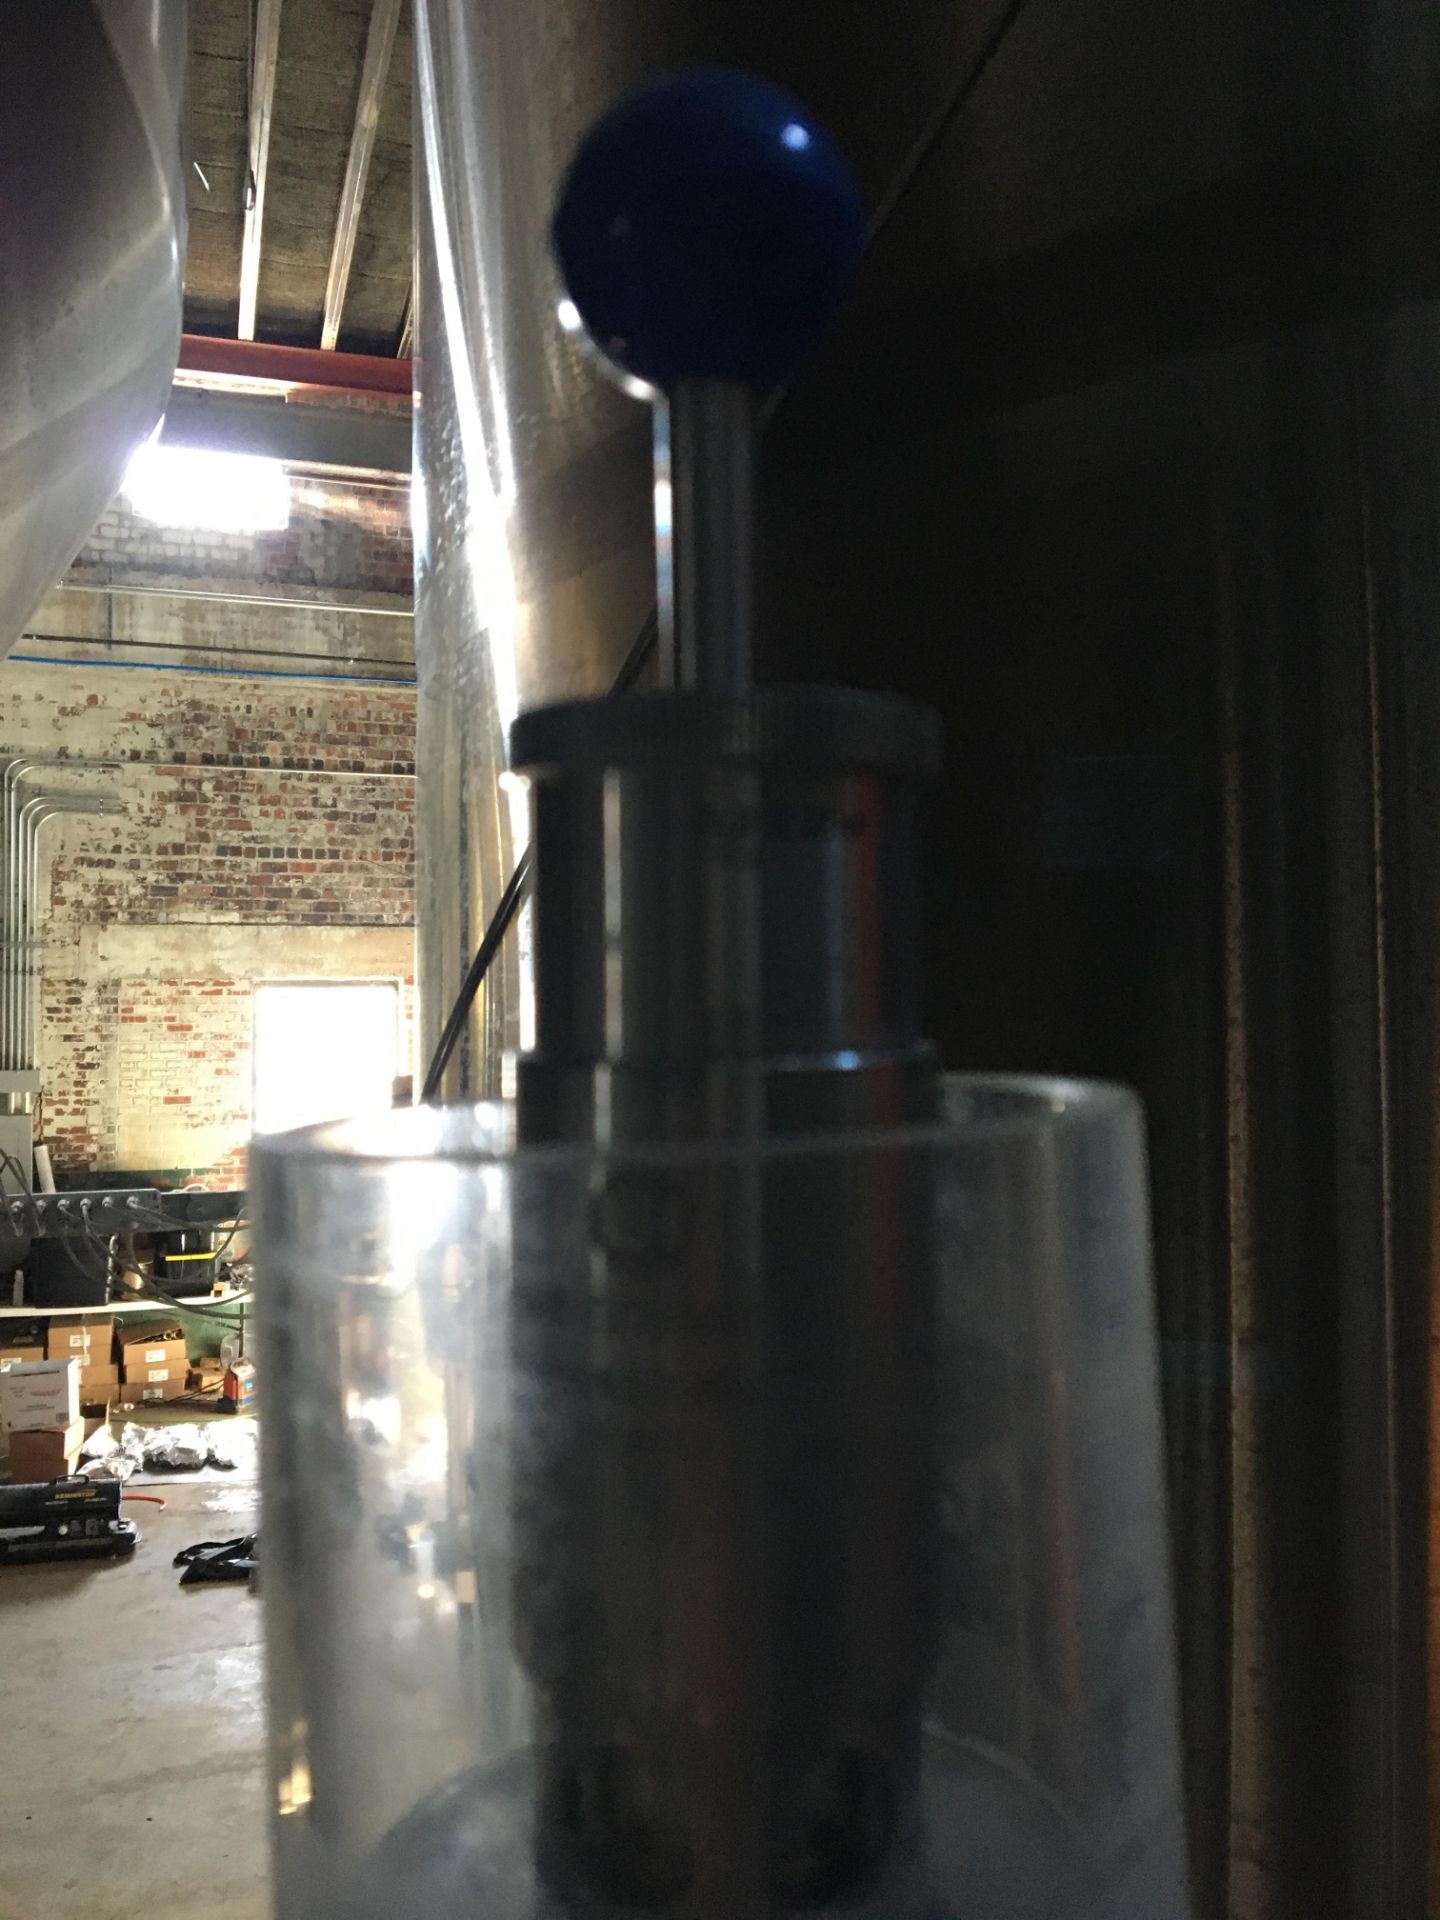 80-BBL Minnetonka Fermentation Tank, Model 80-BBL, Year 2017, Stainless Steel; Vessel store wort and - Image 8 of 14